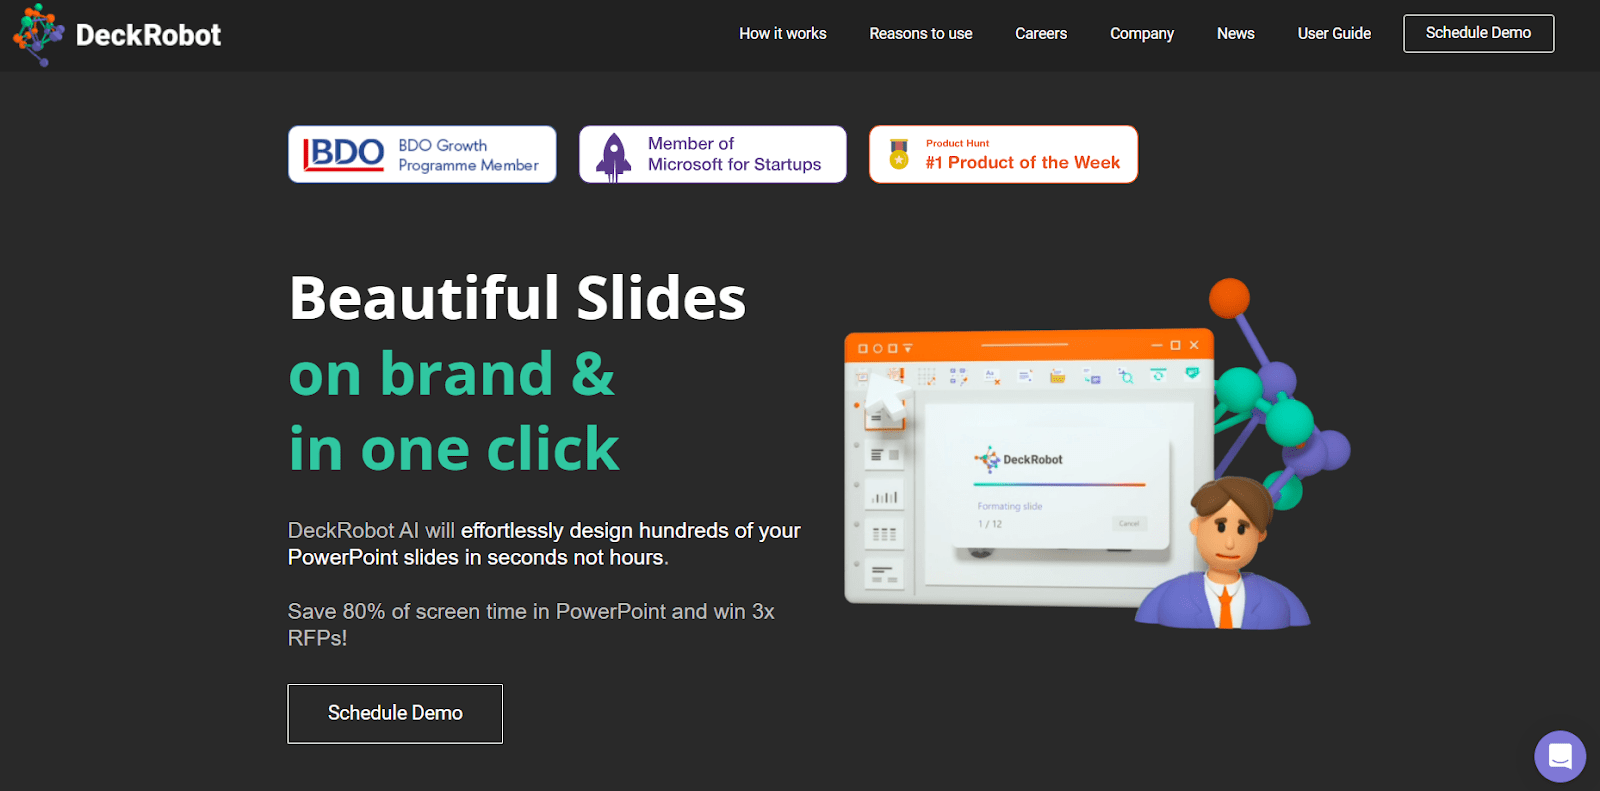 deck robot website - beautiful slides on brand and in one click